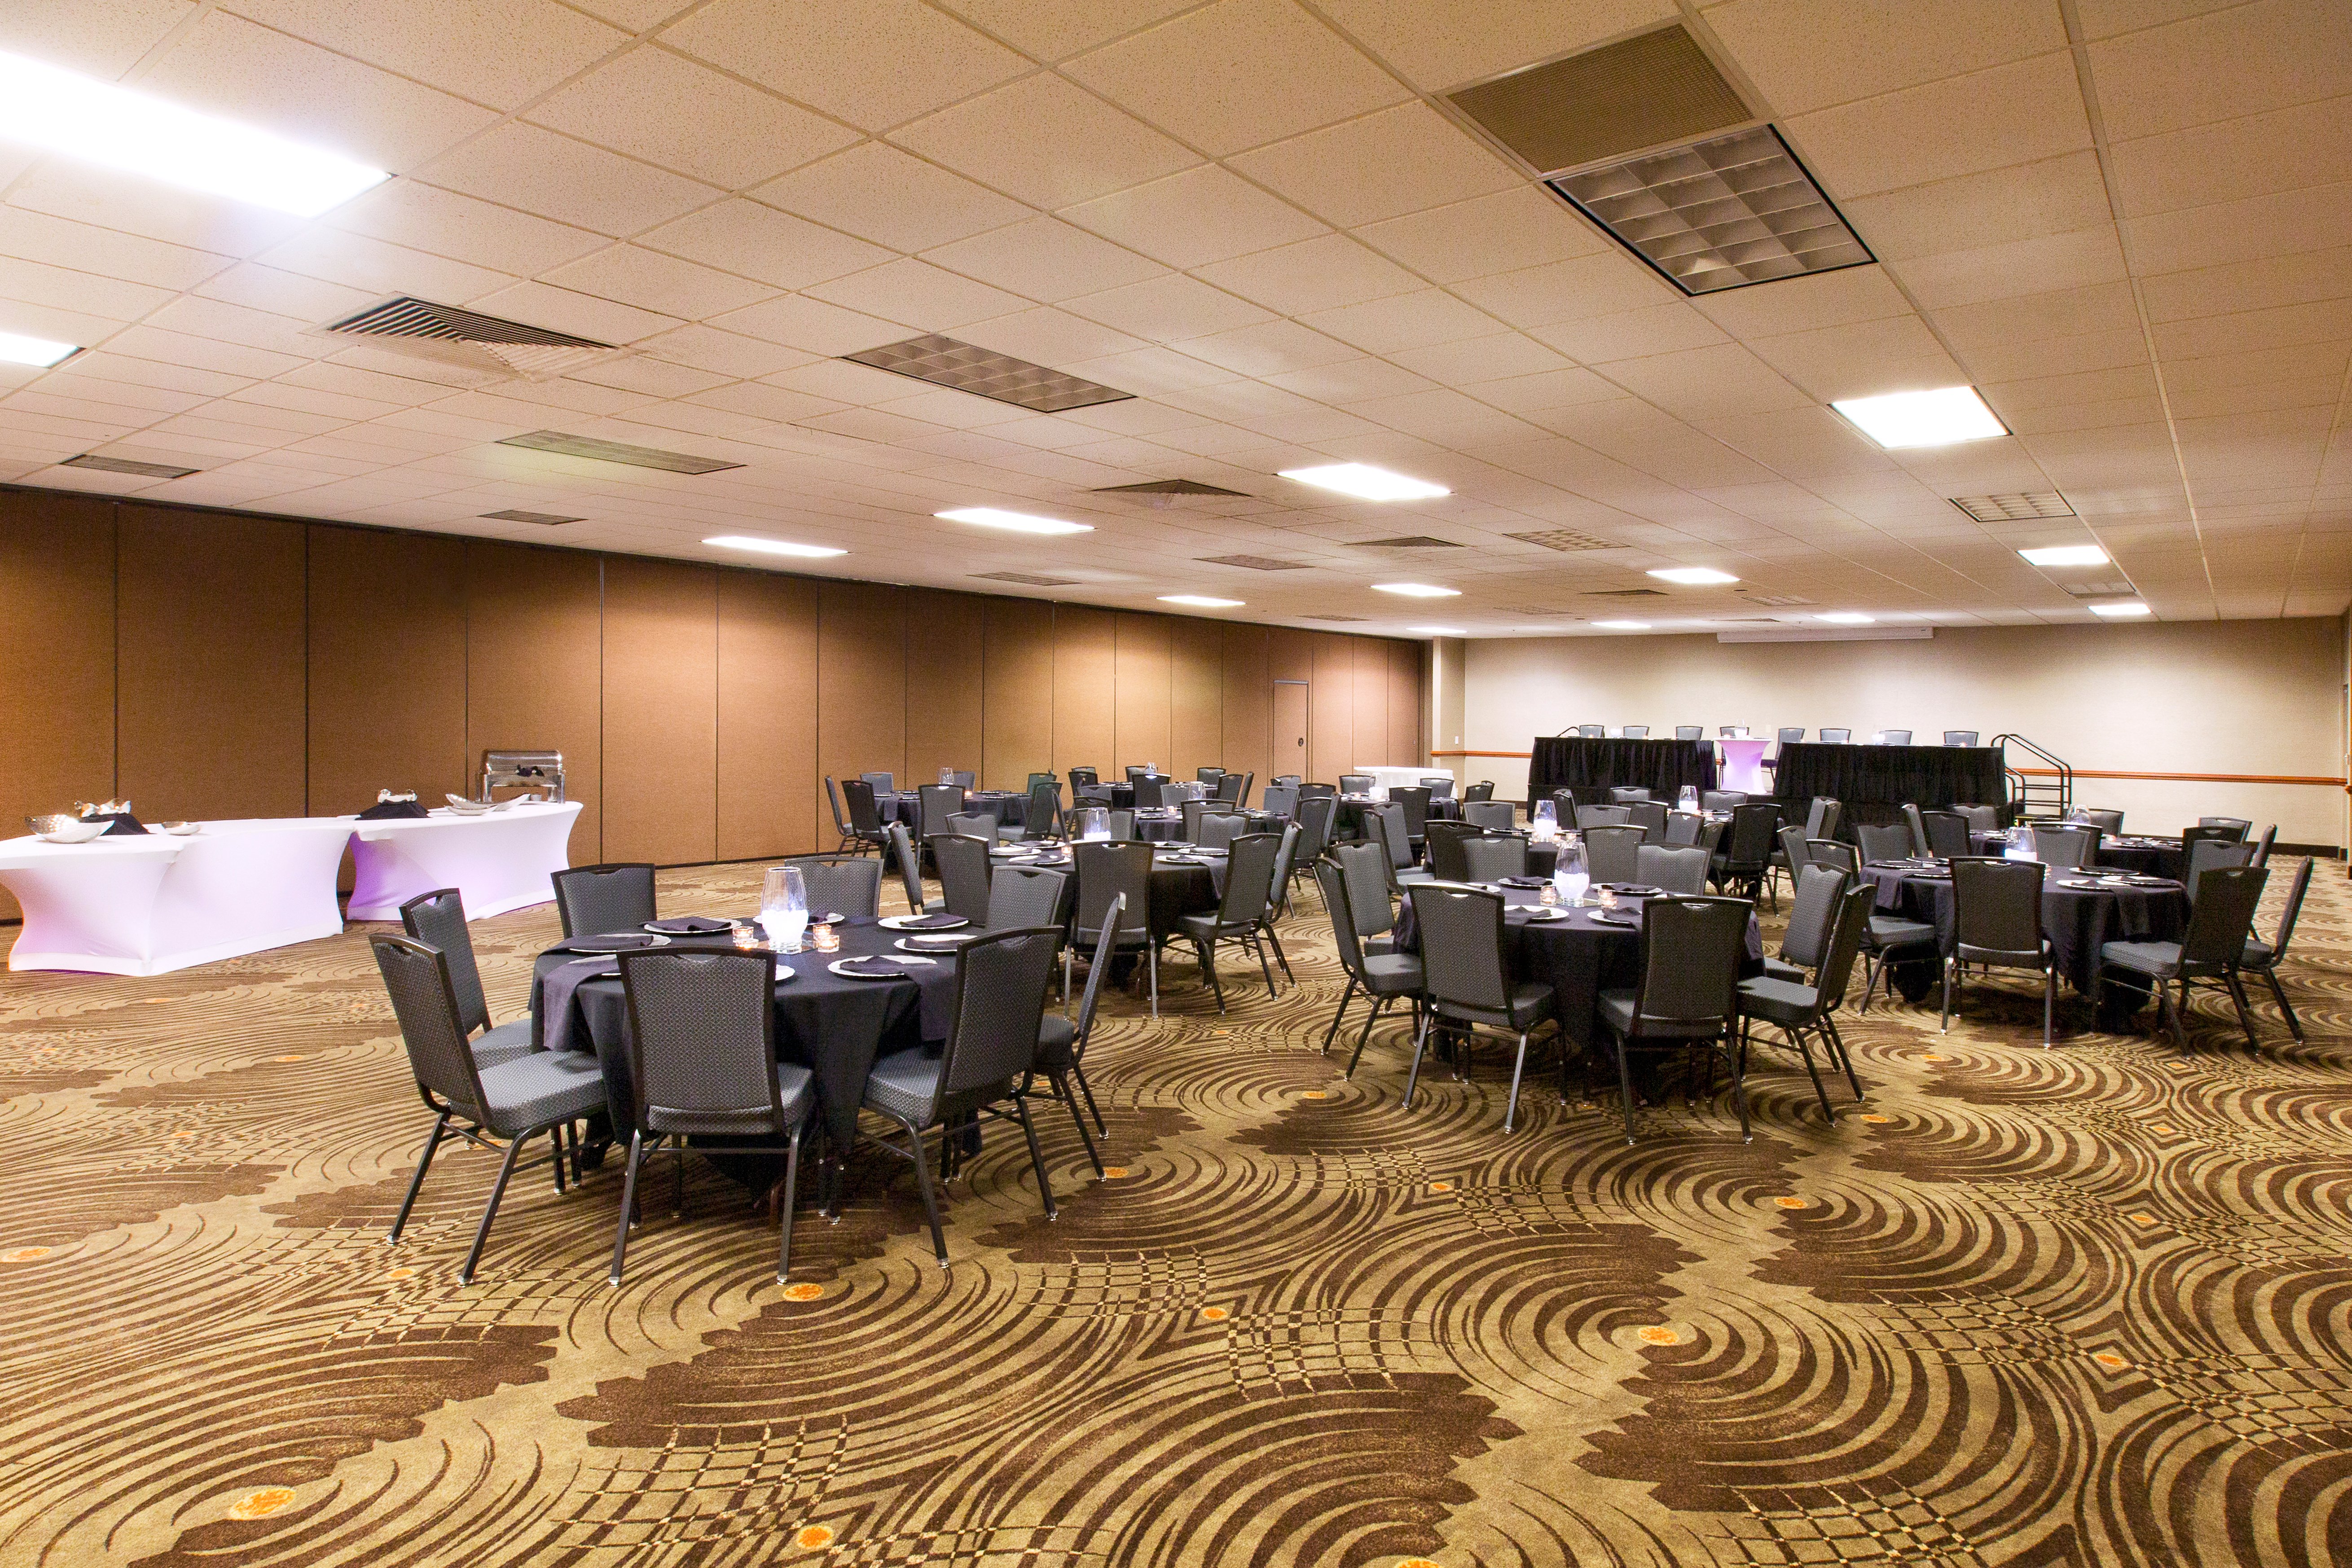 Falls West Room is ready to make your next event the best yet!